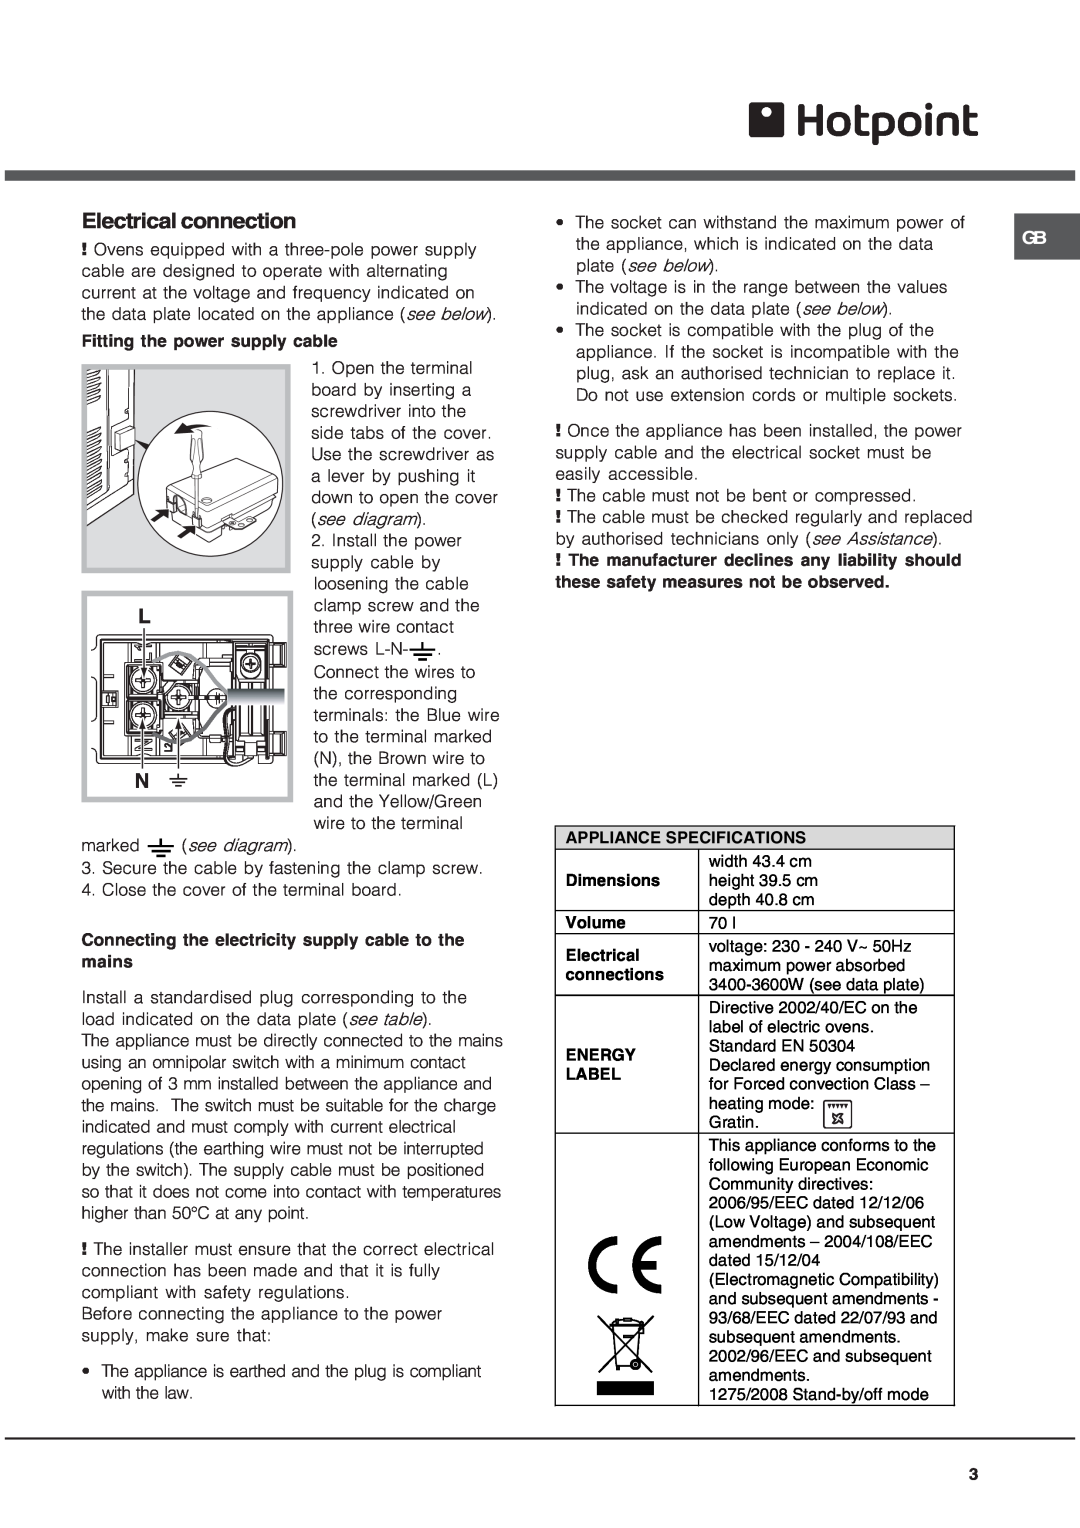 Hotpoint OS manual Electrical connection 